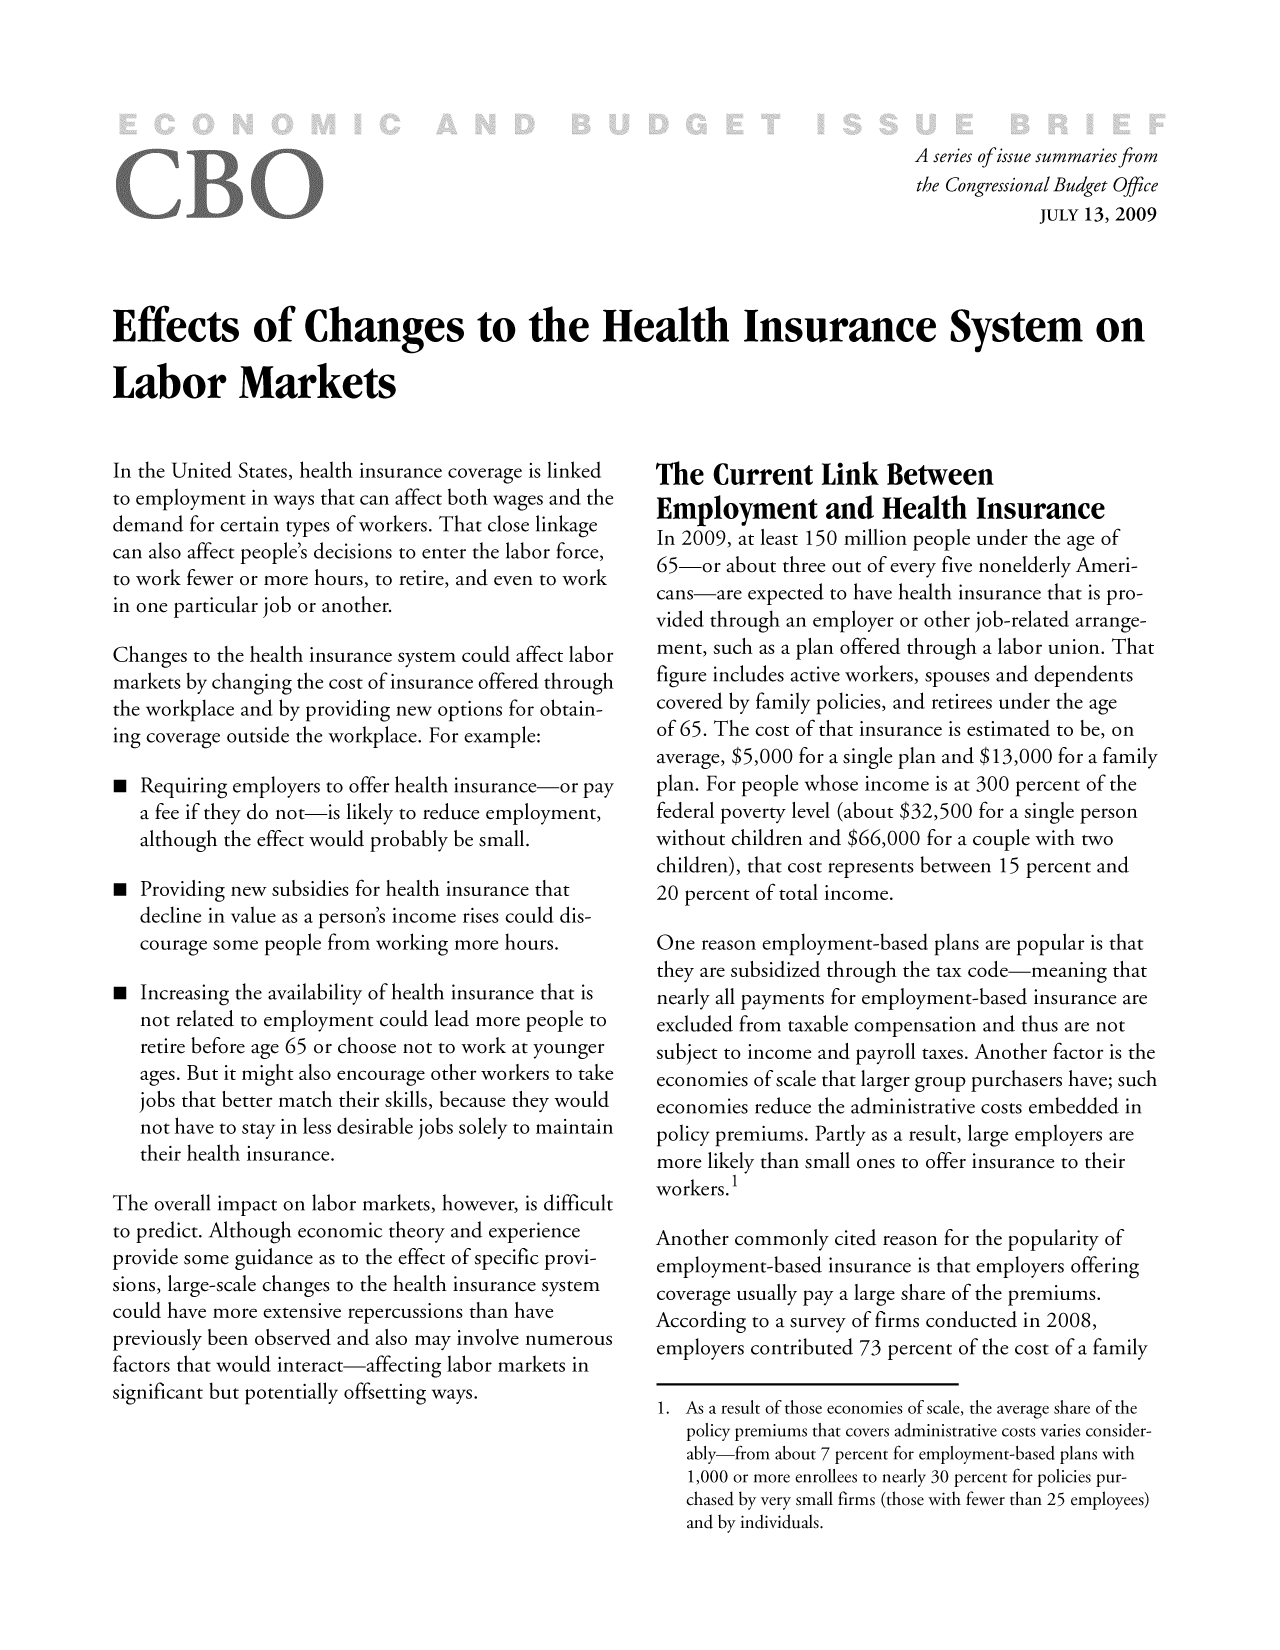 handle is hein.congrec/cbo9362 and id is 1 raw text is: A series ofissue summaries from
the Congressional Budget Office
JULY 13, 2009
Effects of Changes to the Health Insurance System on
Labor Markets

In the United States, health insurance coverage is linked
to employment in ways that can affect both wages and the
demand for certain types of workers. That close linkage
can also affect people's decisions to enter the labor force,
to work fewer or more hours, to retire, and even to work
in one particular job or another.
Changes to the health insurance system could affect labor
markets by changing the cost of insurance offered through
the workplace and by providing new options for obtain-
ing coverage outside the workplace. For example:
 Requiring employers to offer health insurance-or pay
a fee if they do not-is likely to reduce employment,
although the effect would probably be small.
 Providing new subsidies for health insurance that
decline in value as a person's income rises could dis-
courage some people from working more hours.
 Increasing the availability of health insurance that is
not related to employment could lead more people to
retire before age 65 or choose not to work at younger
ages. But it might also encourage other workers to take
jobs that better match their skills, because they would
not have to stay in less desirable jobs solely to maintain
their health insurance.
The overall impact on labor markets, however, is difficult
to predict. Although economic theory and experience
provide some guidance as to the effect of specific provi-
sions, large-scale changes to the health insurance system
could have more extensive repercussions than have
previously been observed and also may involve numerous
factors that would interact-affecting labor markets in
significant but potentially offsetting ways.

The Current Link Between
Employment and Health Insurance
In 2009, at least 150 million people under the age of
65-or about three out of every five nonelderly Ameri-
cans-are expected to have health insurance that is pro-
vided through an employer or other job-related arrange-
ment, such as a plan offered through a labor union. That
figure includes active workers, spouses and dependents
covered by family policies, and retirees under the age
of 65. The cost of that insurance is estimated to be, on
average, $5,000 for a single plan and $13,000 for a family
plan. For people whose income is at 300 percent of the
federal poverty level (about $32,500 for a single person
without children and $66,000 for a couple with two
children), that cost represents between 15 percent and
20 percent of total income.
One reason employment-based plans are popular is that
they are subsidized through the tax code-meaning that
nearly all payments for employment-based insurance are
excluded from taxable compensation and thus are not
subject to income and payroll taxes. Another factor is the
economies of scale that larger group purchasers have; such
economies reduce the administrative costs embedded in
policy premiums. Partly as a result, large employers are
more likely than small ones to offer insurance to their
workers. 1
Another commonly cited reason for the popularity of
employment-based insurance is that employers offering
coverage usually pay a large share of the premiums.
According to a survey of firms conducted in 2008,
employers contributed 73 percent of the cost of a family
1. As a result of those economies of scale, the average share of the
policy premiums that covers administrative costs varies consider-
ably-from about 7 percent for employment-based plans with
1,000 or more enrollees to nearly 30 percent for policies pur-
chased by very small firms (those with fewer than 25 employees)
and by individuals.


